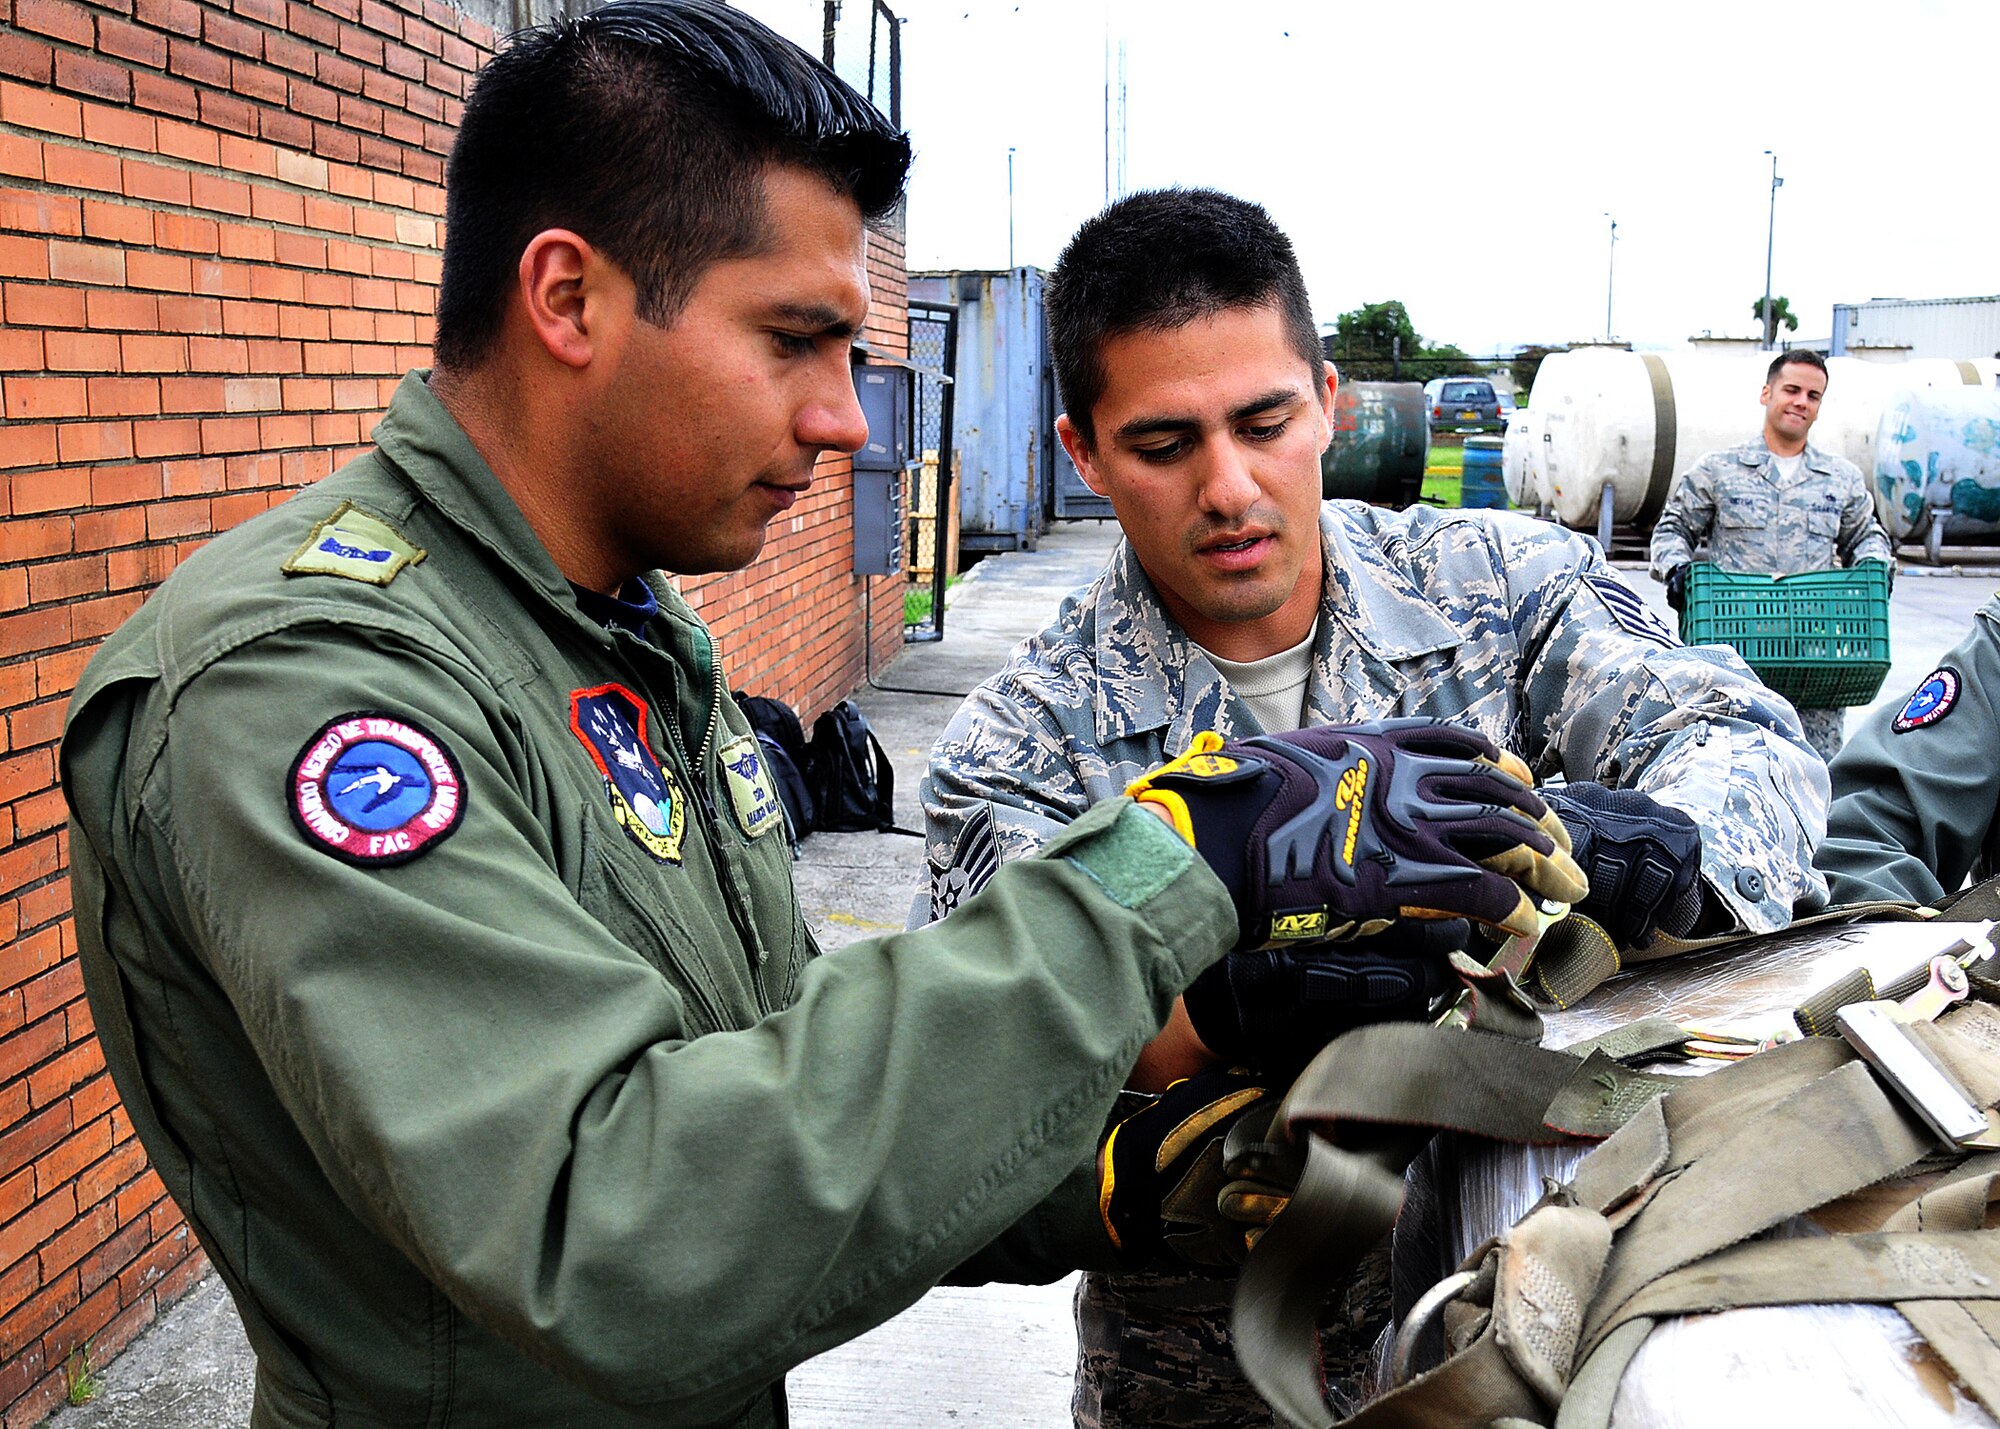 Staff Sgt. Peter Salinas, 571st Mobility Support Advisory Squadron air transportation air advisor, works with Técnico Edwin Camacho, Colombian air force, secure cargo straps during the hands on pallet build-up seminar June 6 at Commando Aéreo de Transporte Militar, Bogota, Colombia.  (U.S. Air Force photo by Tech. Sgt. Lesley Waters)